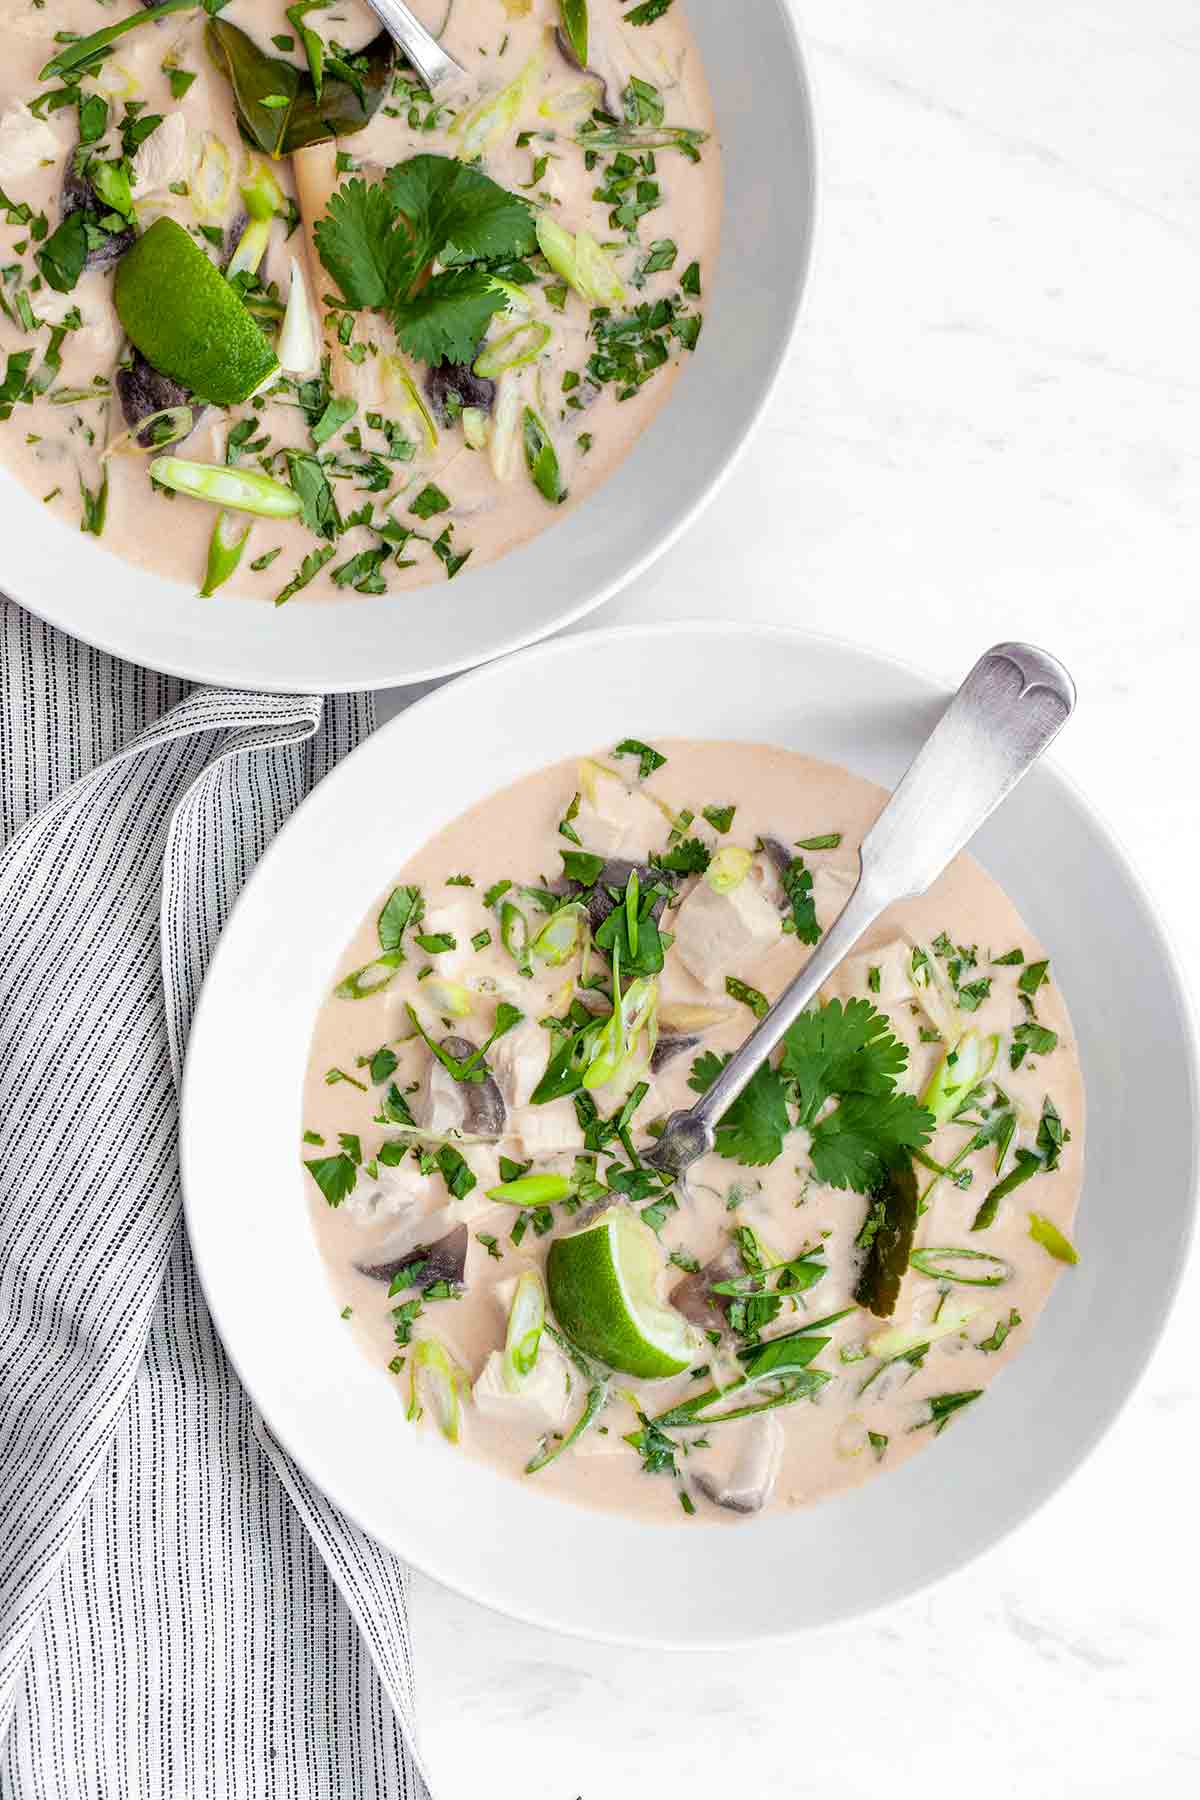 Two bowls of Thai-inspired chicken soup with coconut milk and lemongrass on a striped napkin.